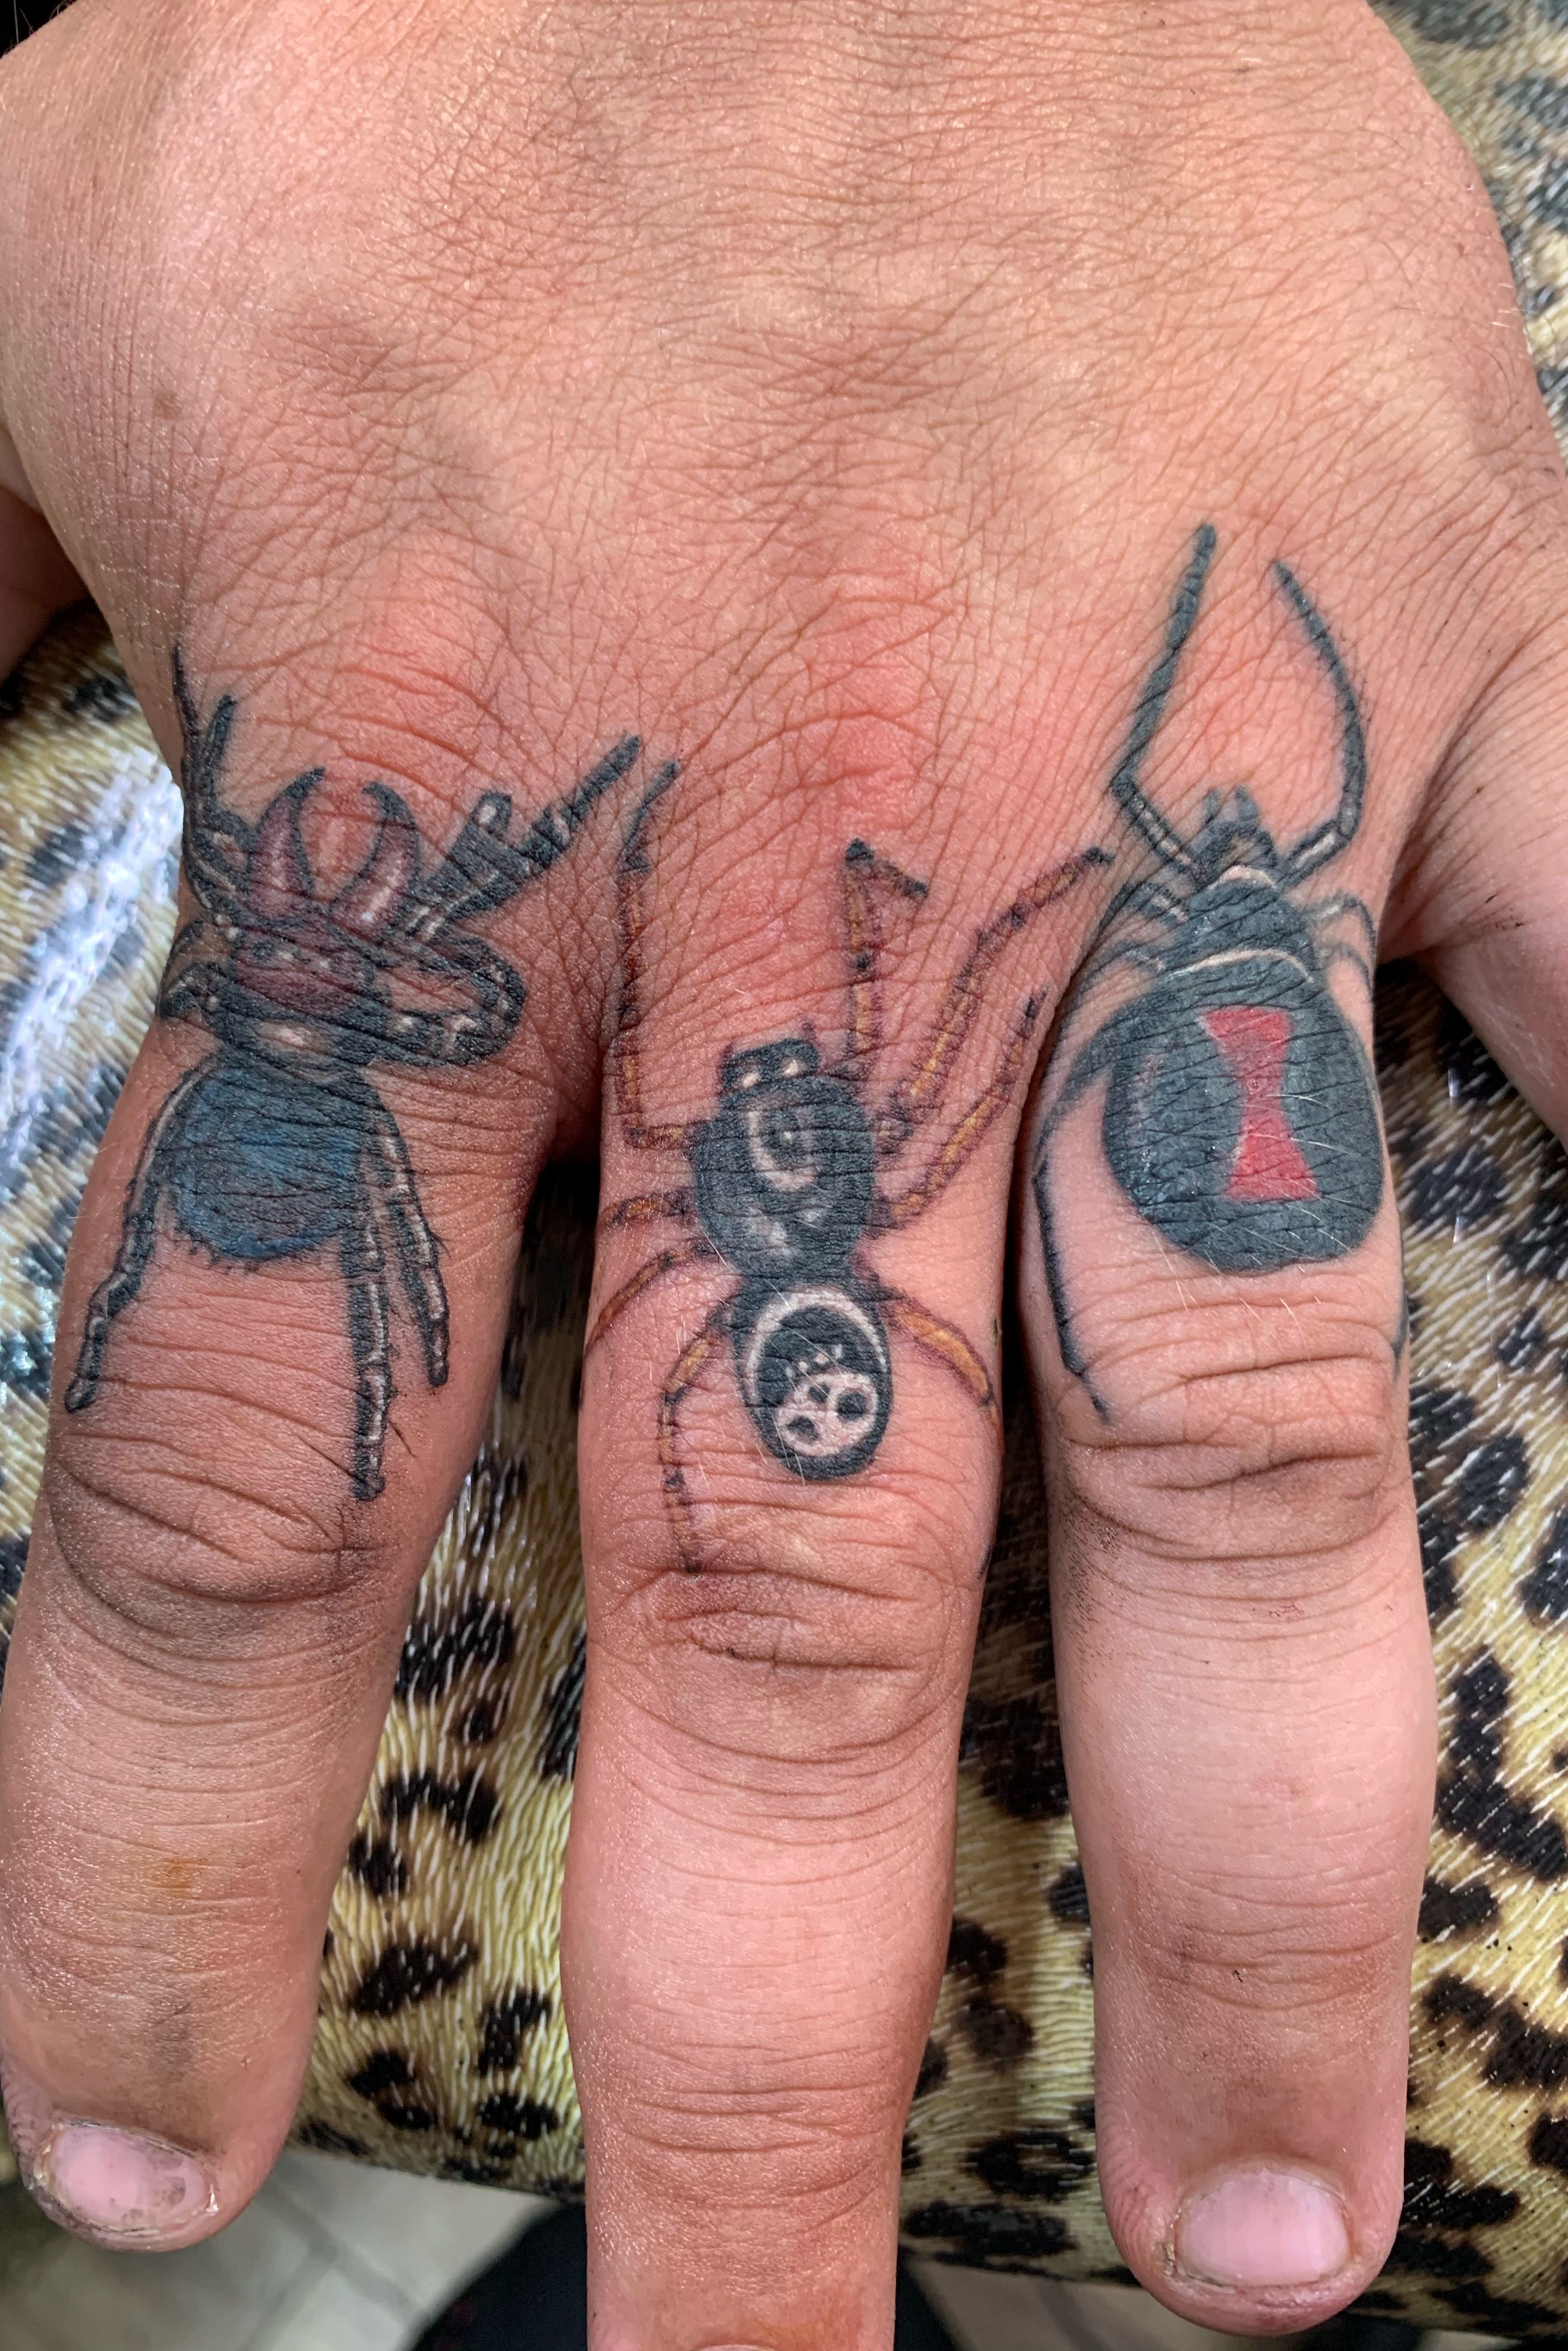 Rate This Small Spider Web Tattoo 1 to 100  Small hand tattoos Finger  tattoos Web tattoo